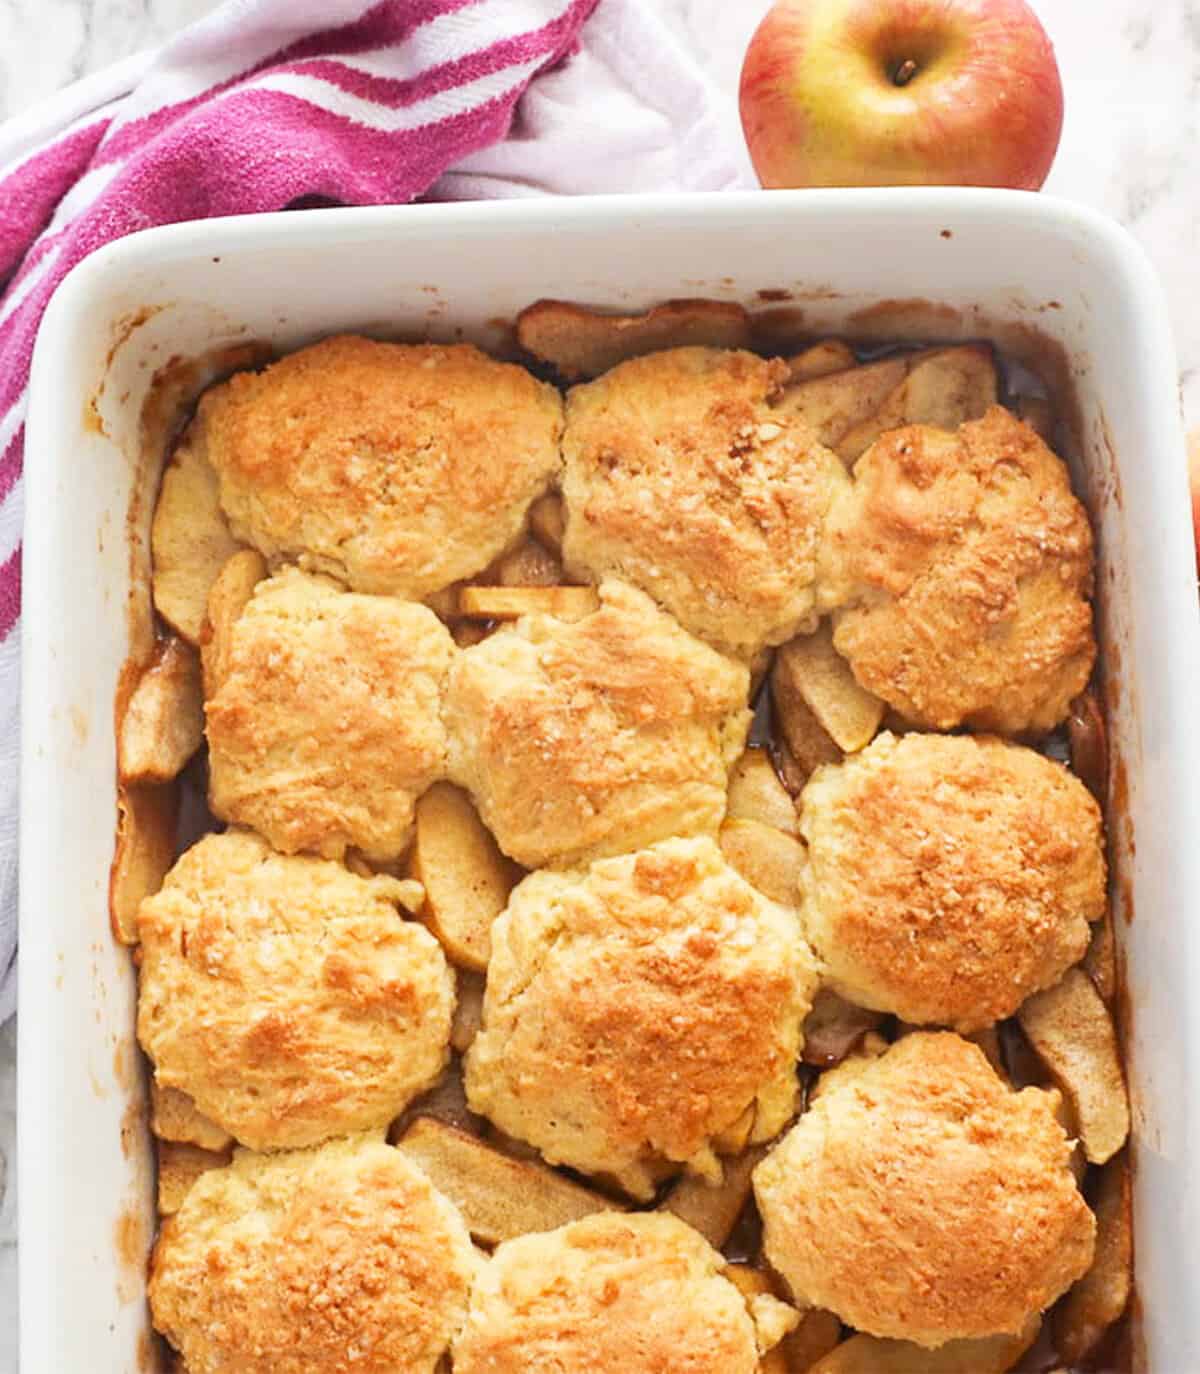 Apple Cobbler – This popular fall dessert is made from juicy fresh apples